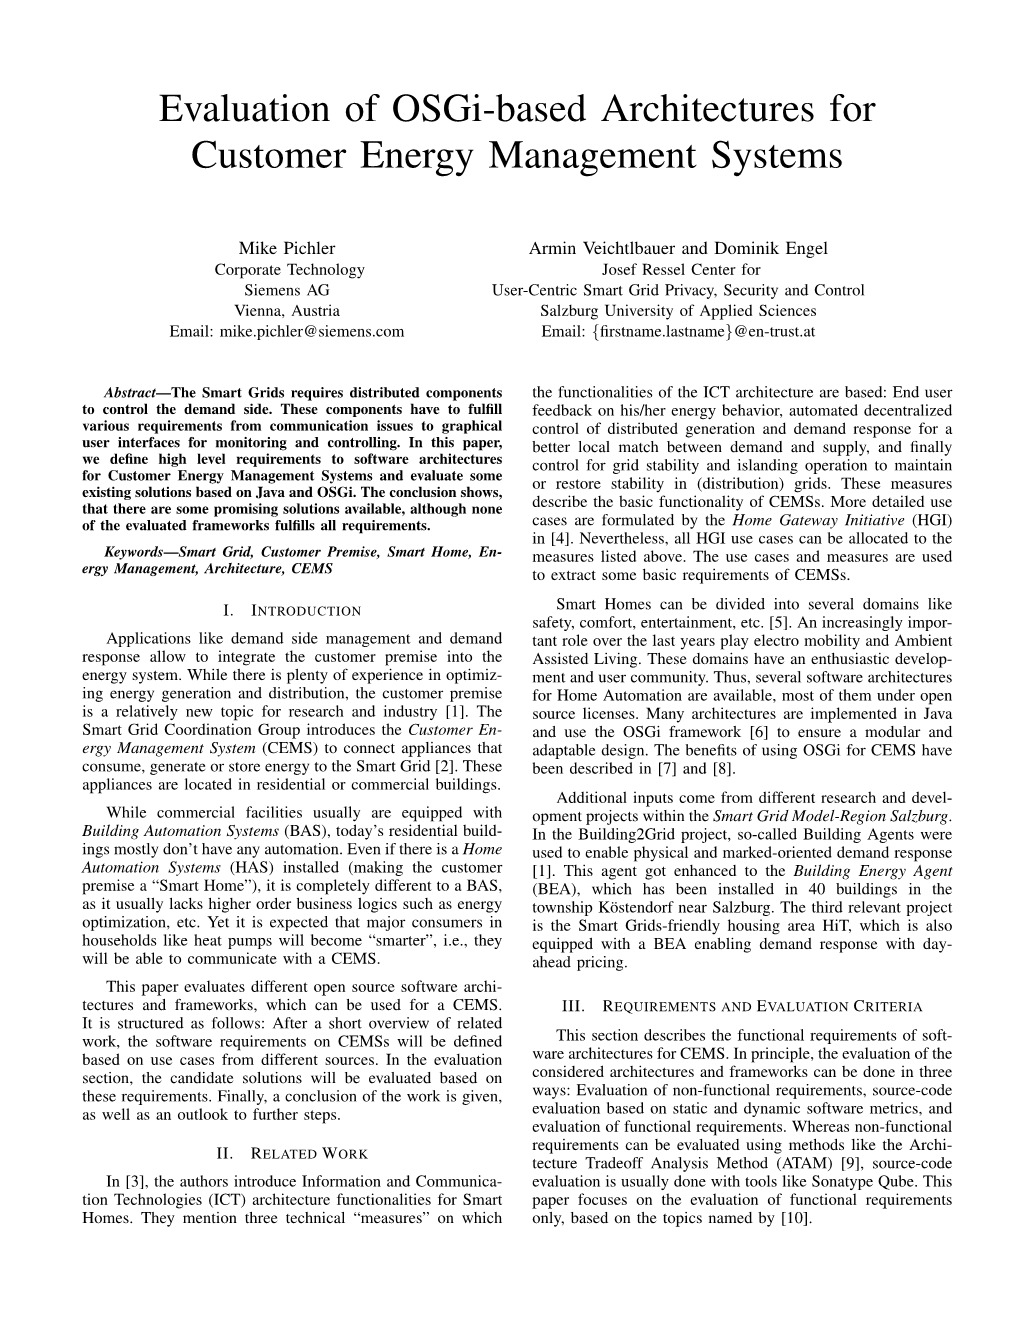 Evaluation of Osgi-Based Architectures for Customer Energy Management Systems